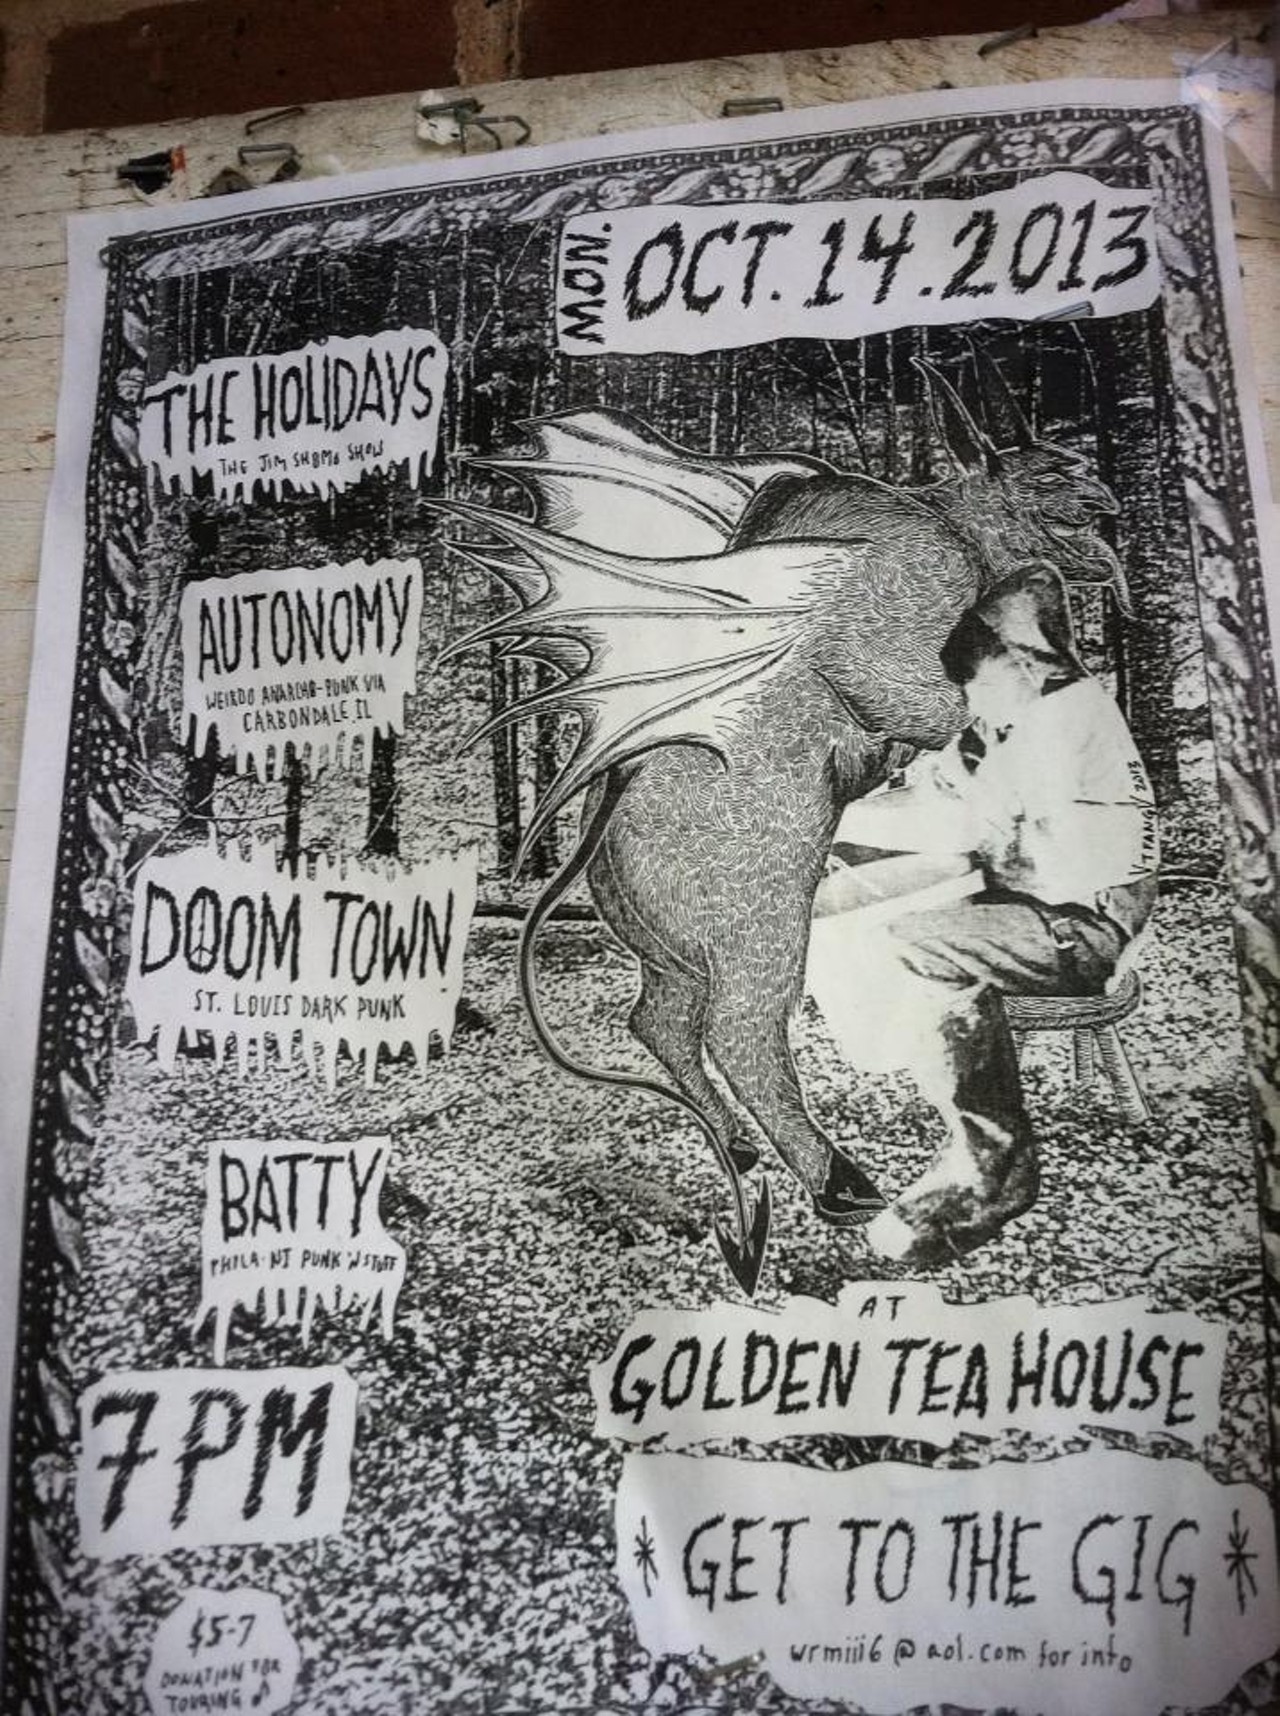 Best Concert -Poster Designer: Ashley Hohman
Steeped in DIY punk aesthetic, Ashley Hohman's poster art is bold, utilizing black-and-white photos and text, and employing the use of a copy machine.Read the full story: Best Concert -Poster Designer: Ashley Hohman